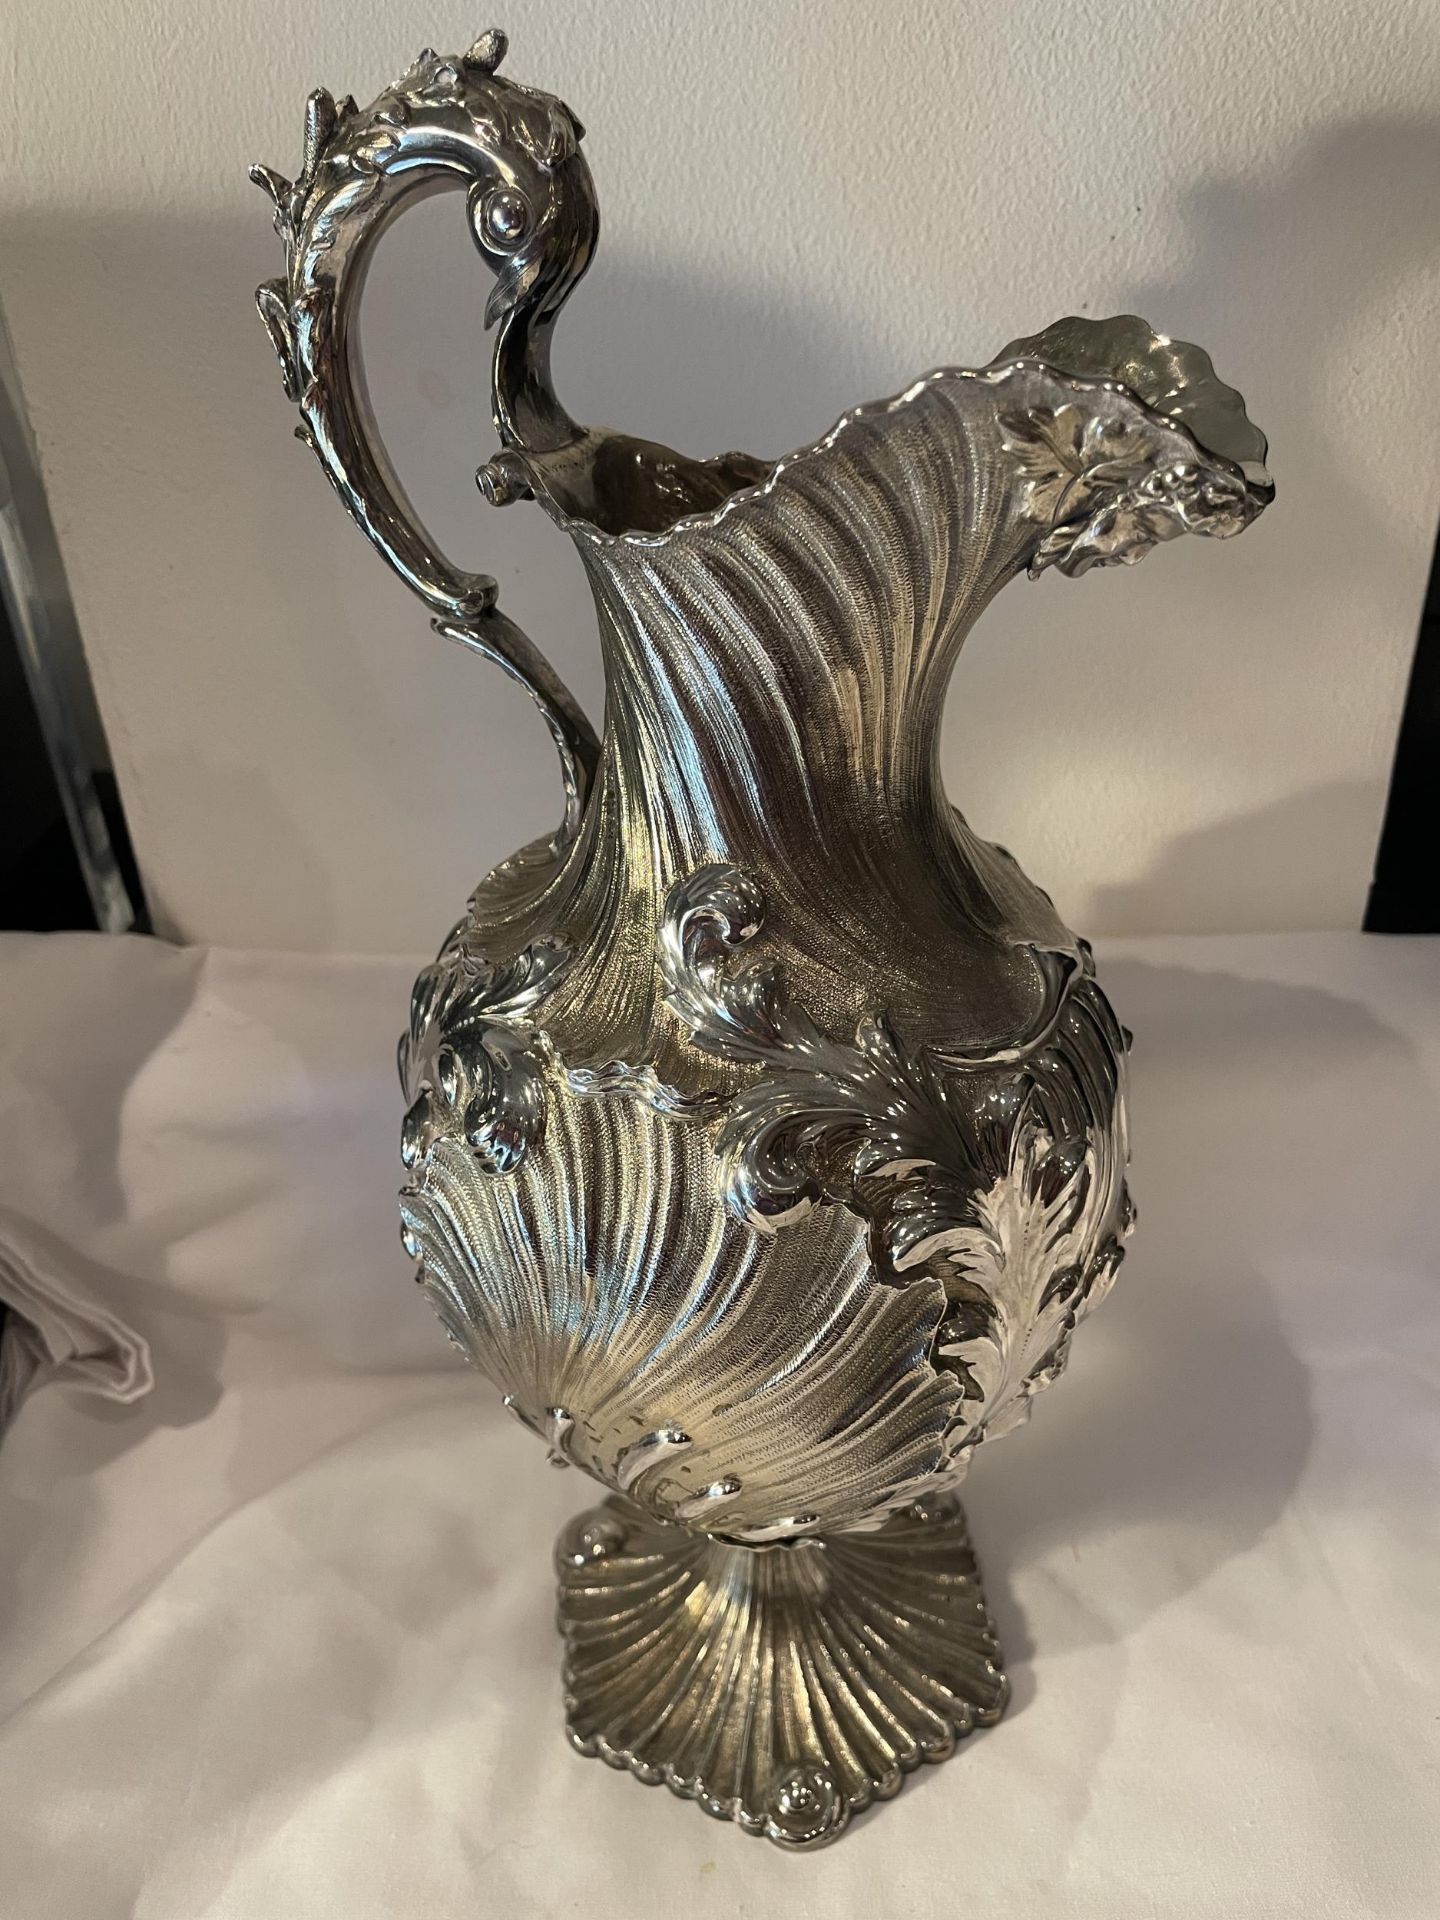 AN ORNATE 1830 HALLMARKED LONDON SILVER CLARET JUG, MAKER CHARLES FOX II GROSS WEIGHT 878 GRAMS - Image 15 of 18